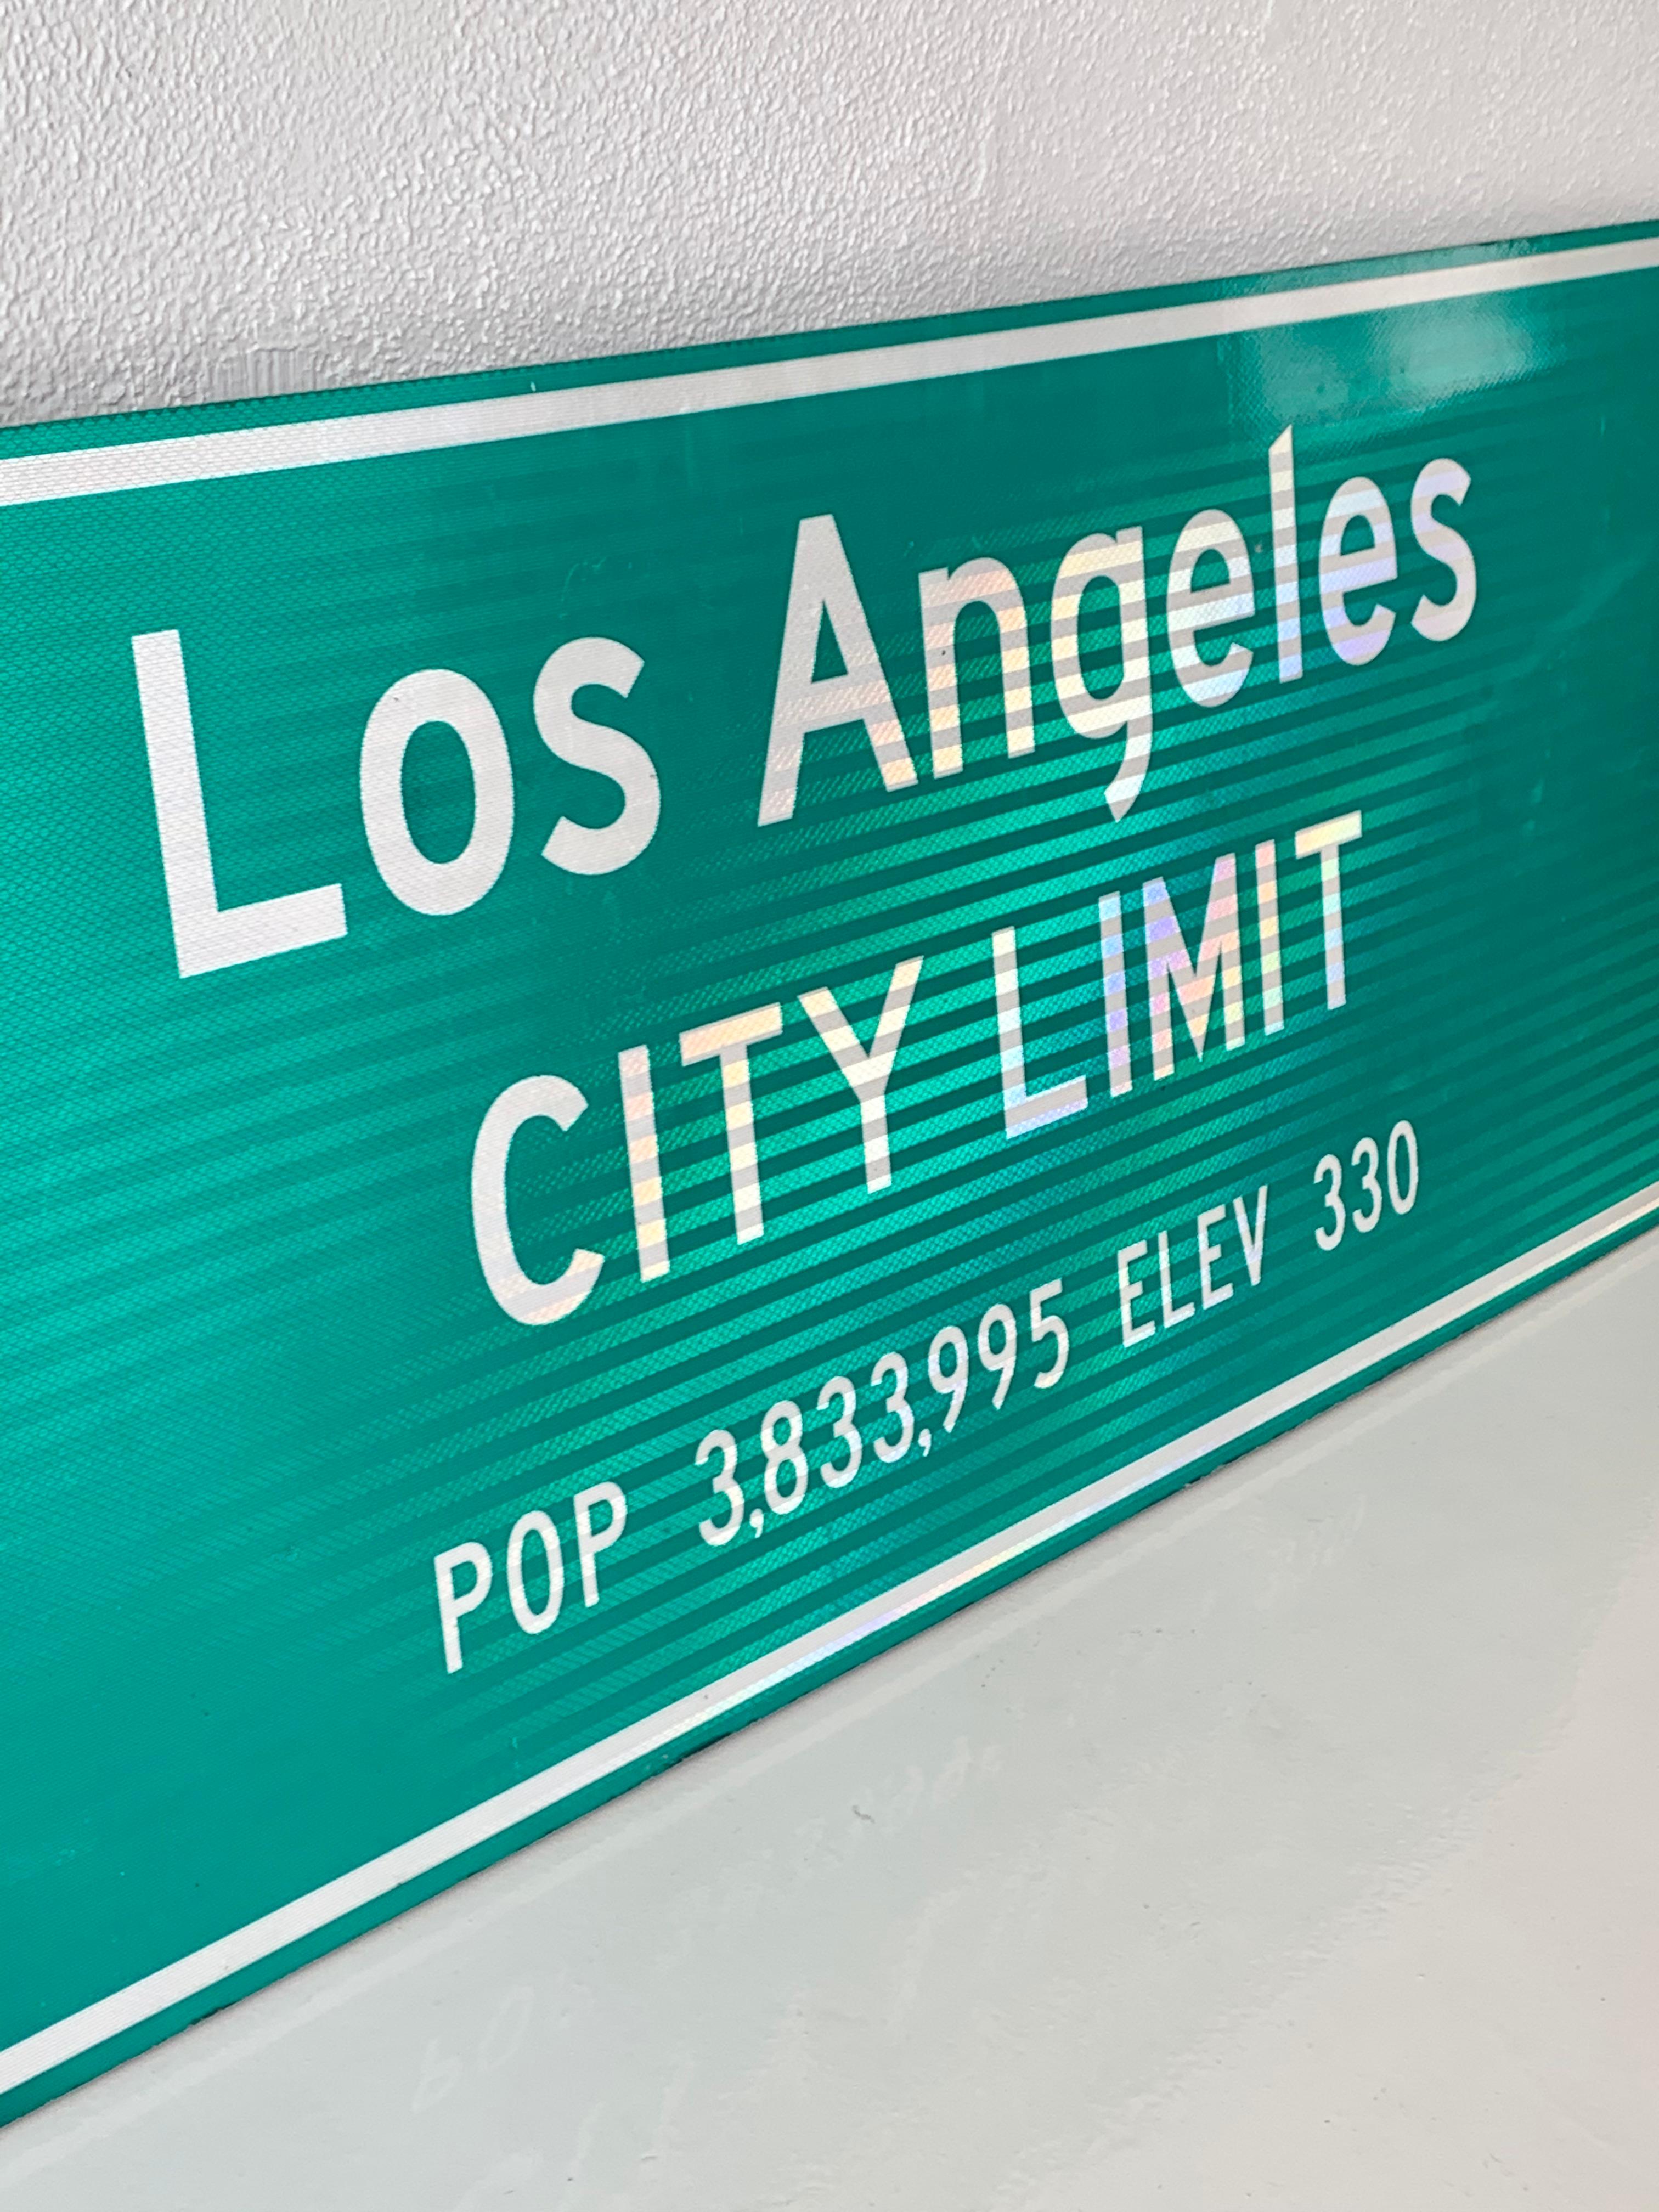 Super cool Los Angeles freeway sign. Made in the late 1990s. This sign welcomed you as you entered the city of Los Angeles. Stamped 